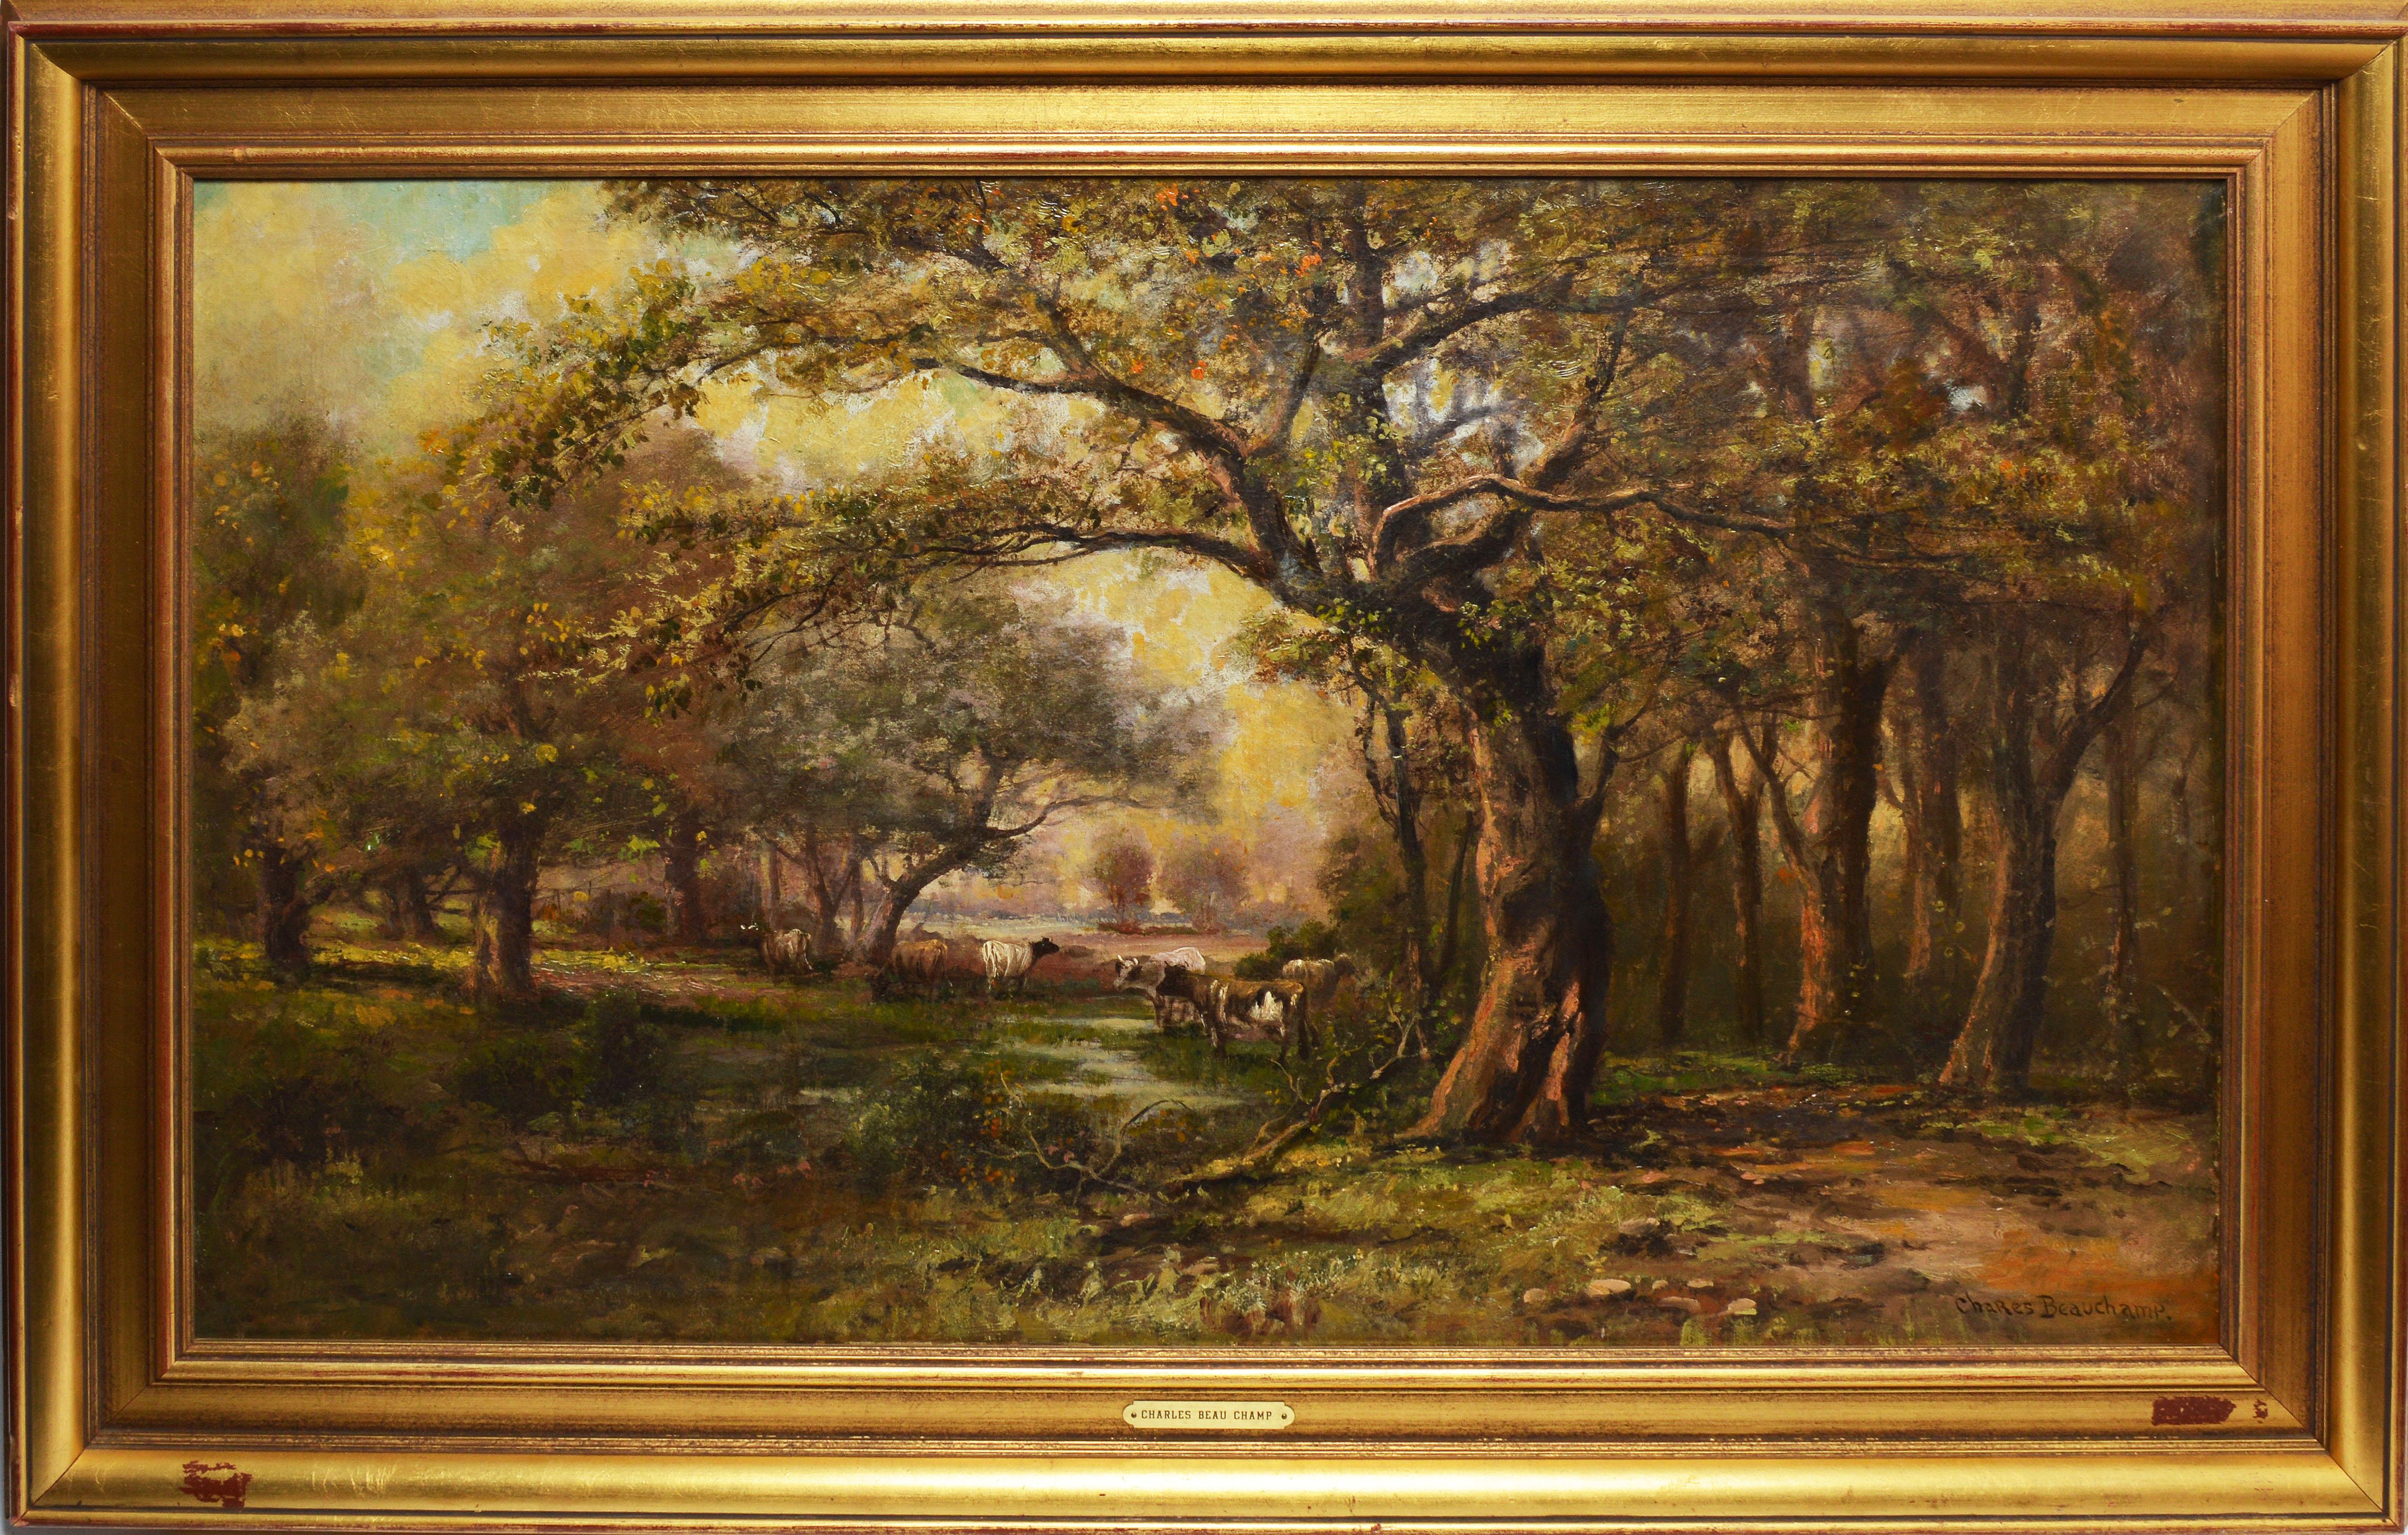 Chares Beauchamp Animal Painting - 19th Century Impressionist Forest View with Cows